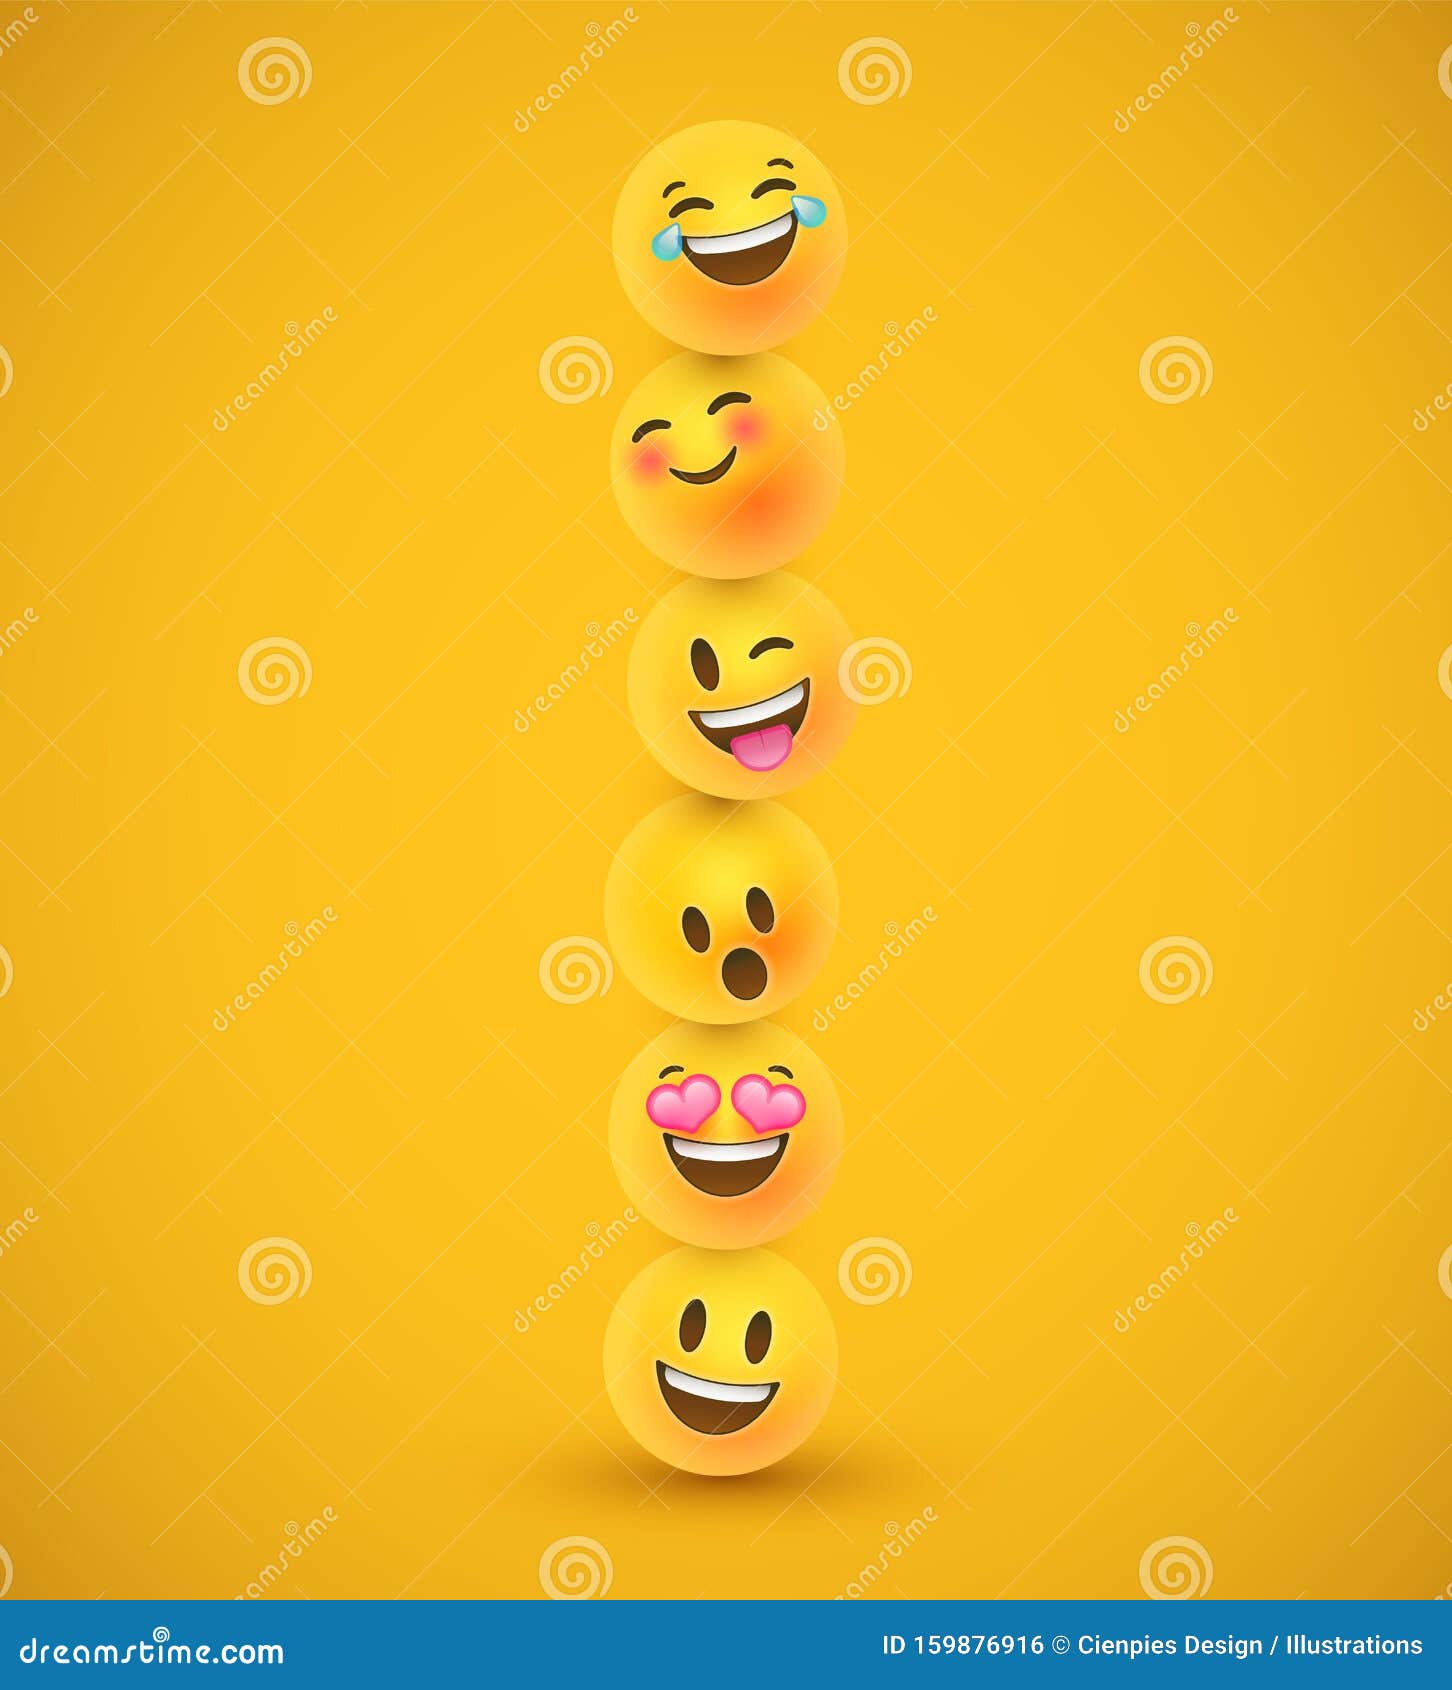 Fun Yellow 3d Emoticon Face Icons in Funny Tower Stock Illustration -  Illustration of wink, face: 159876916